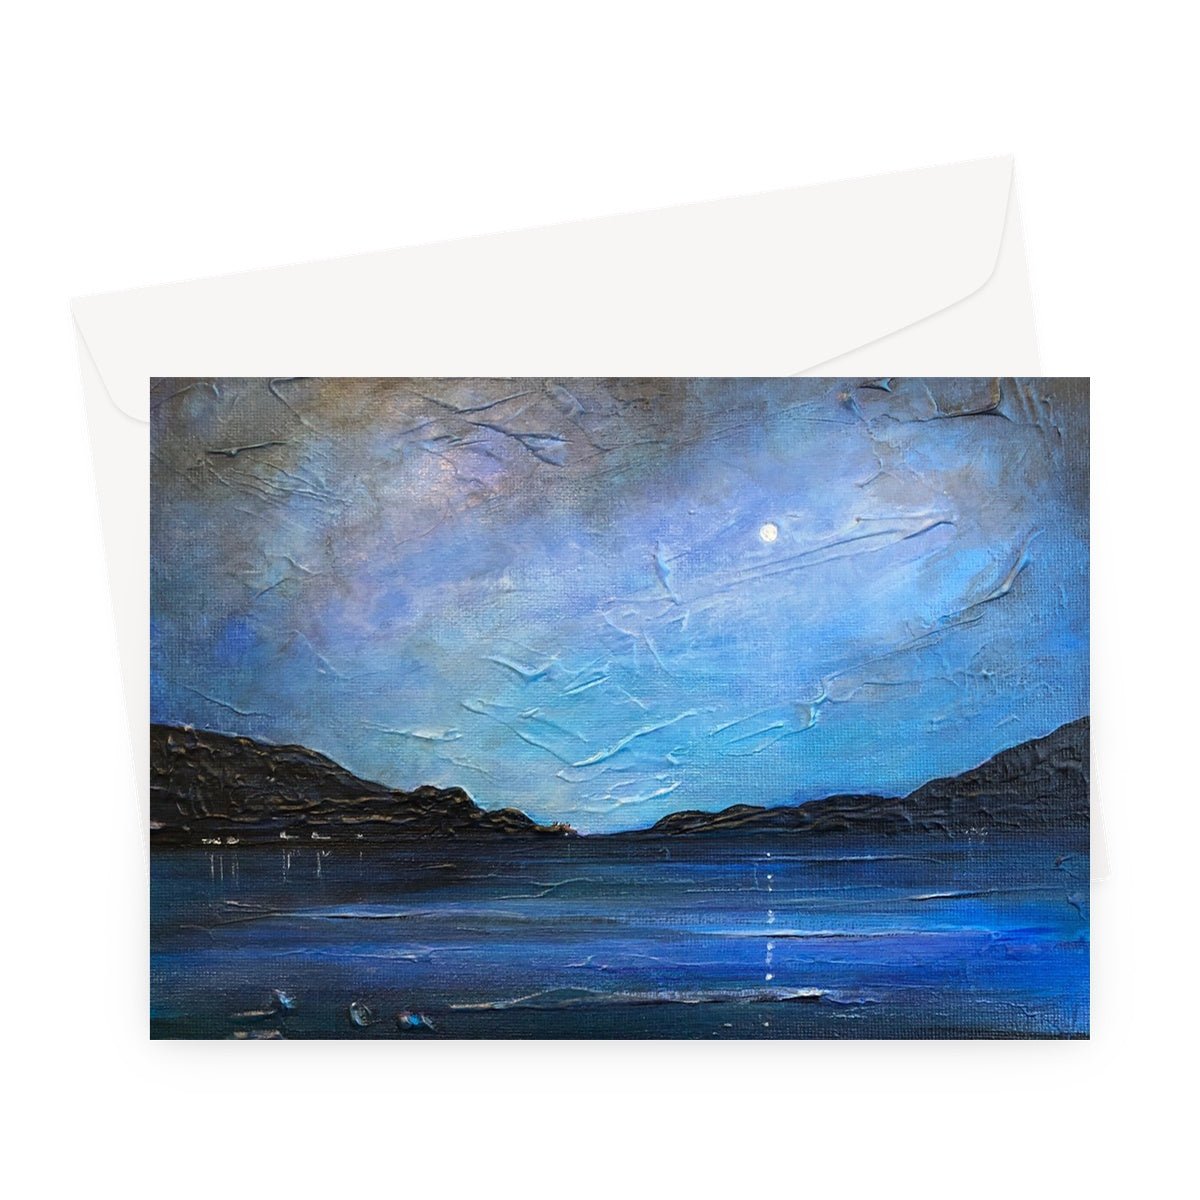 Loch Ness Moonlight Art Gifts Greeting Card-Greetings Cards-Scottish Lochs & Mountains Art Gallery-A5 Landscape-1 Card-Paintings, Prints, Homeware, Art Gifts From Scotland By Scottish Artist Kevin Hunter